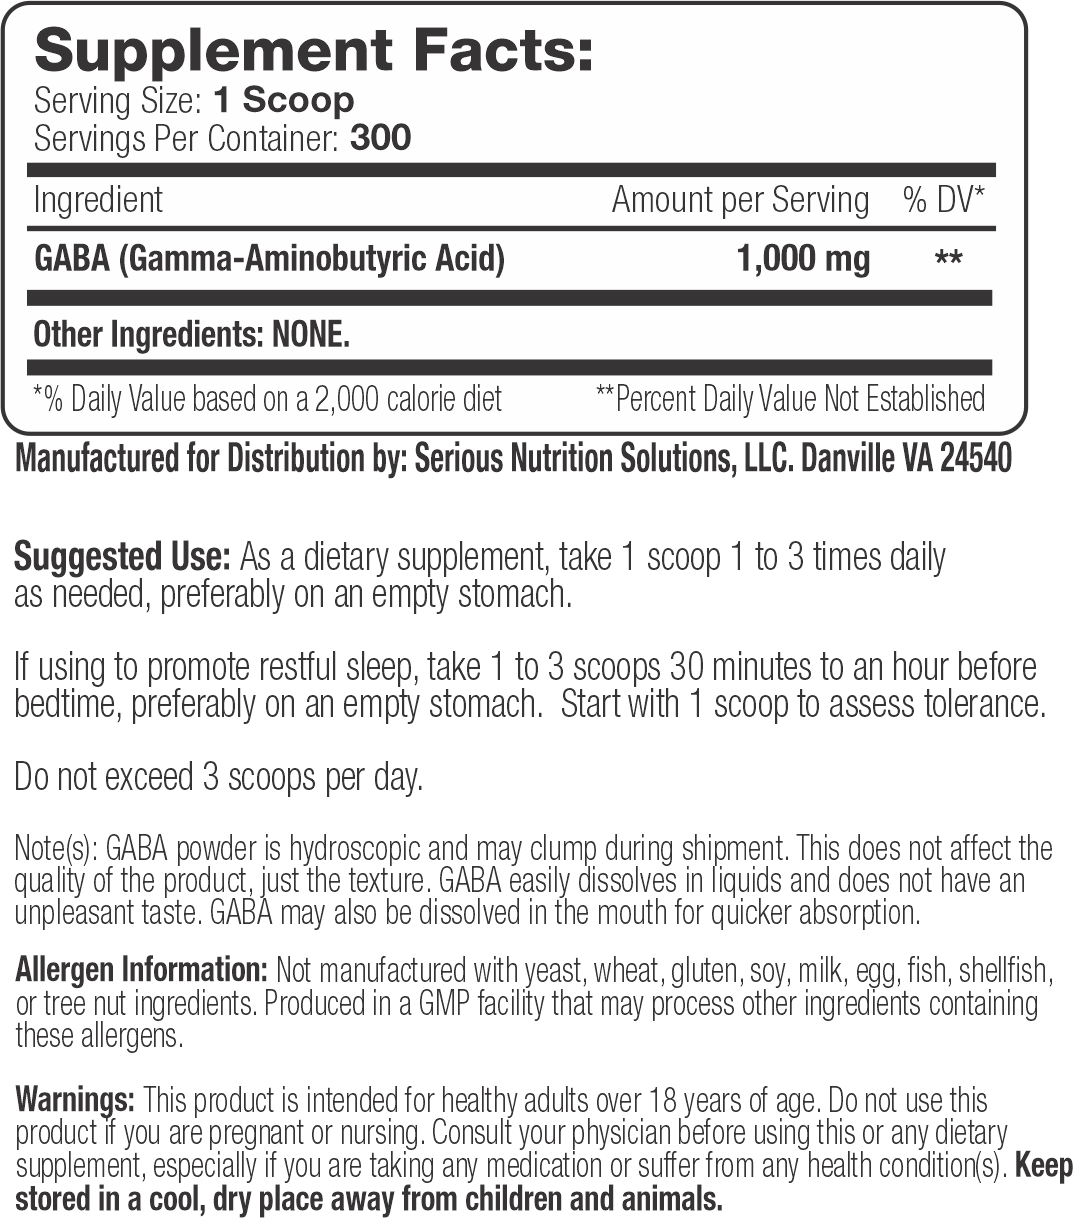 Supplement facts for GABA (Gamma-Aminobutyric Acid) powder by Serious Nutrition Solutions, detailing its dosage, potential uses, and allergy information.